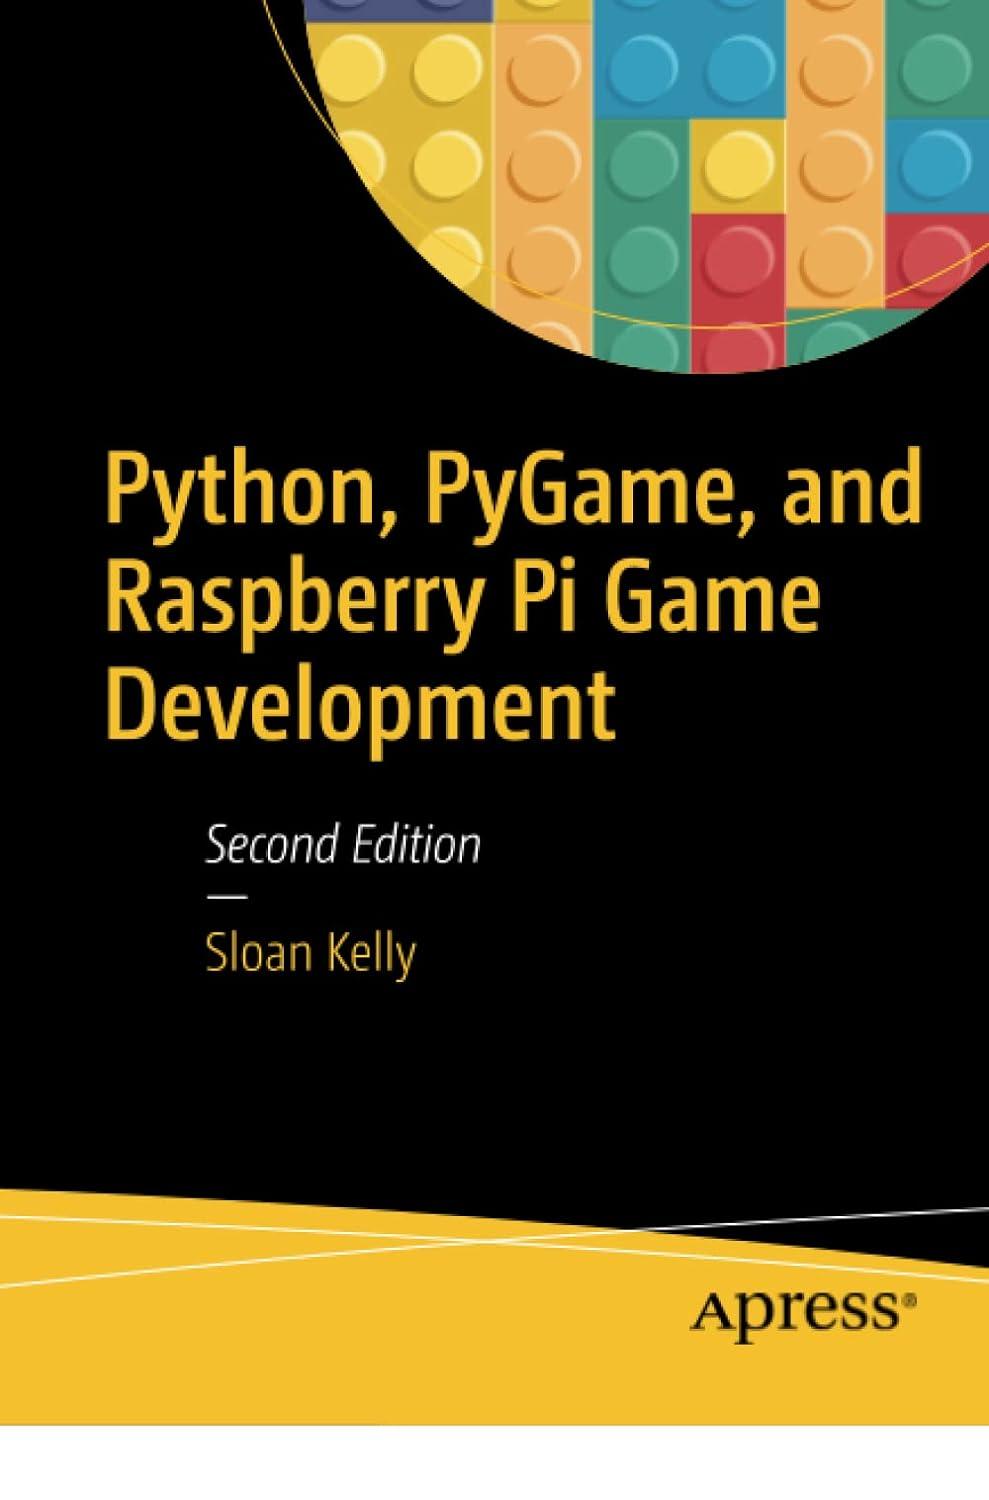 python pygame and raspberry pi game development 2nd edition sloan kelly 1484245326, 978-1484245323